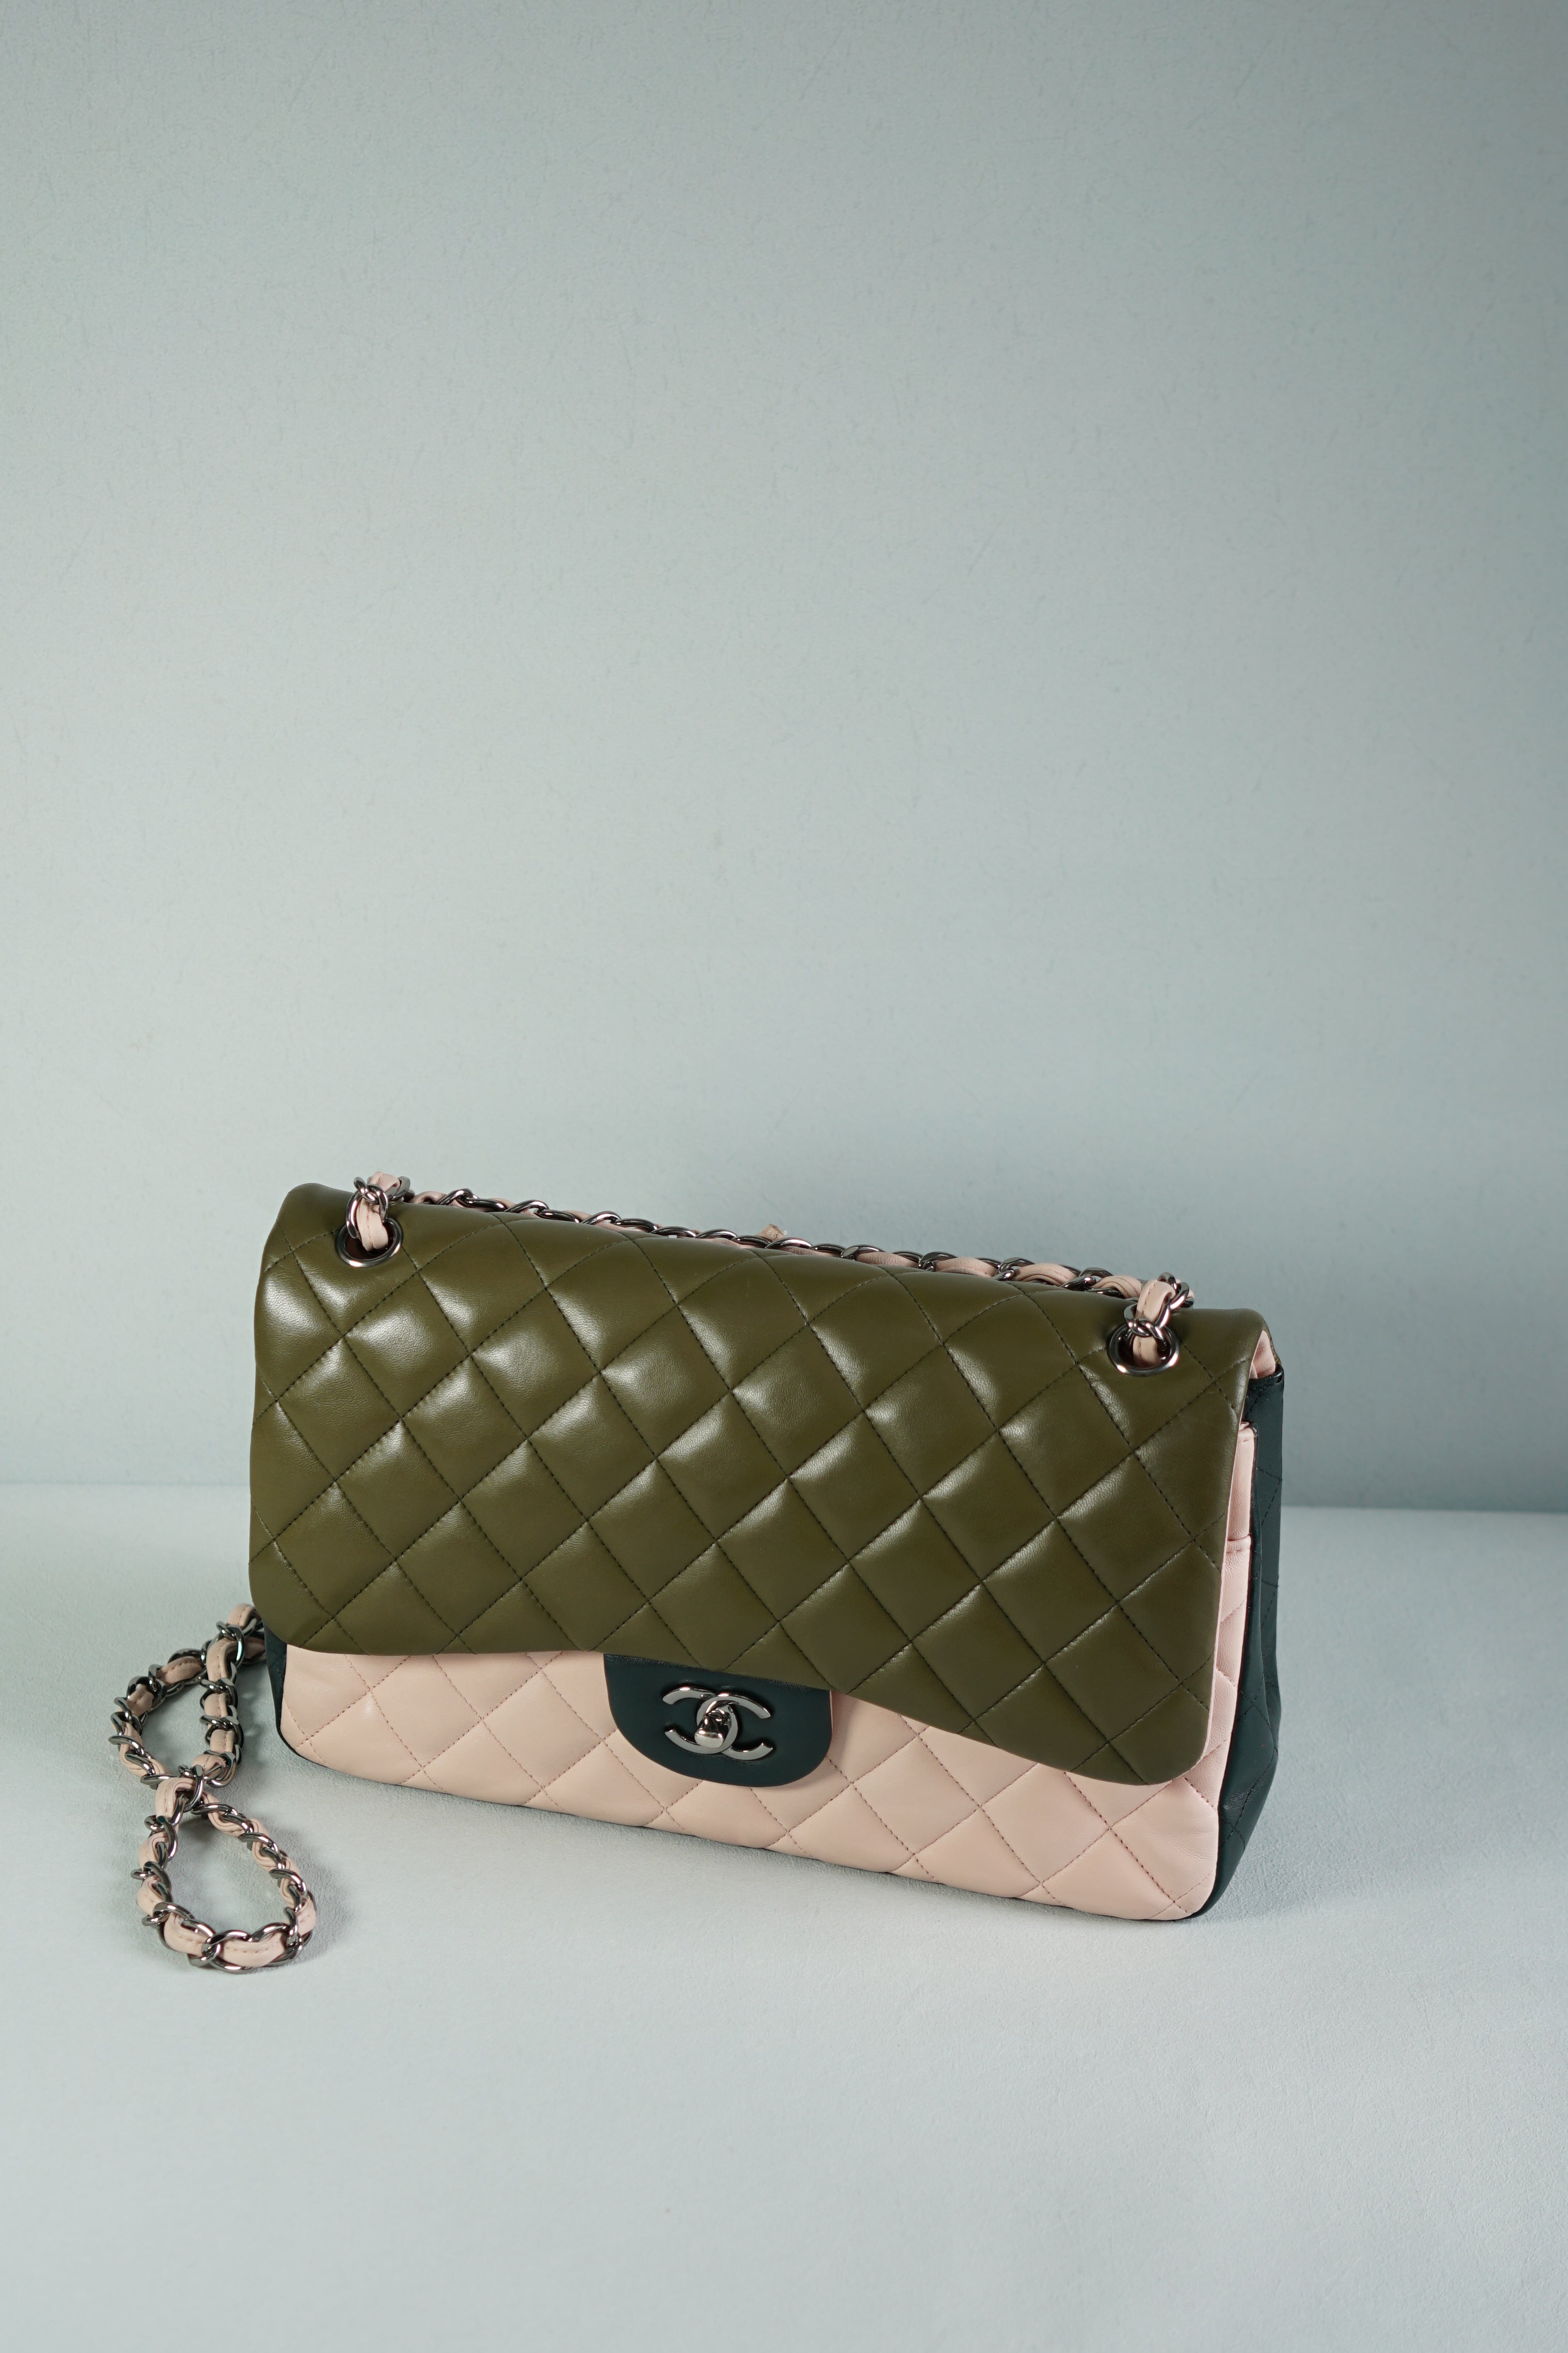 Chanel Classic Double Flap Jumbo in Tricolor Quilted Lambskin and Silver Hardware (Series 23)